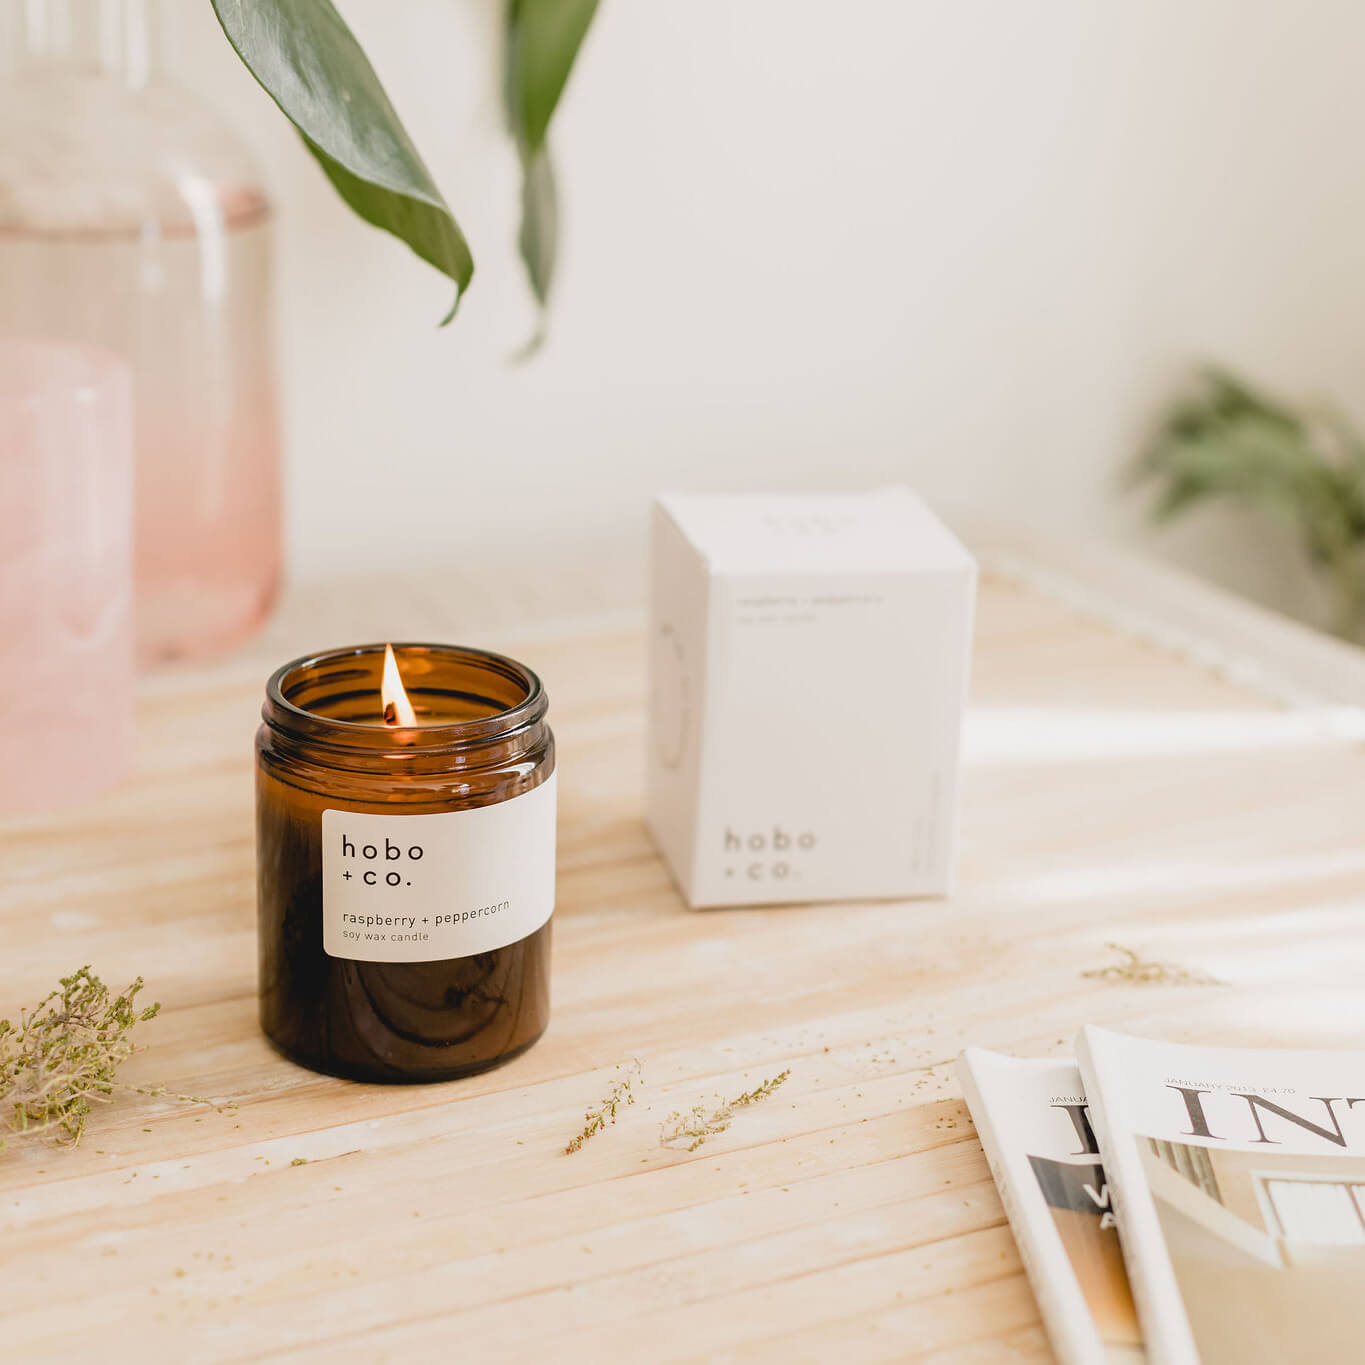 Raspberry & Peppercorn Scented Candle by Hobo & Co.